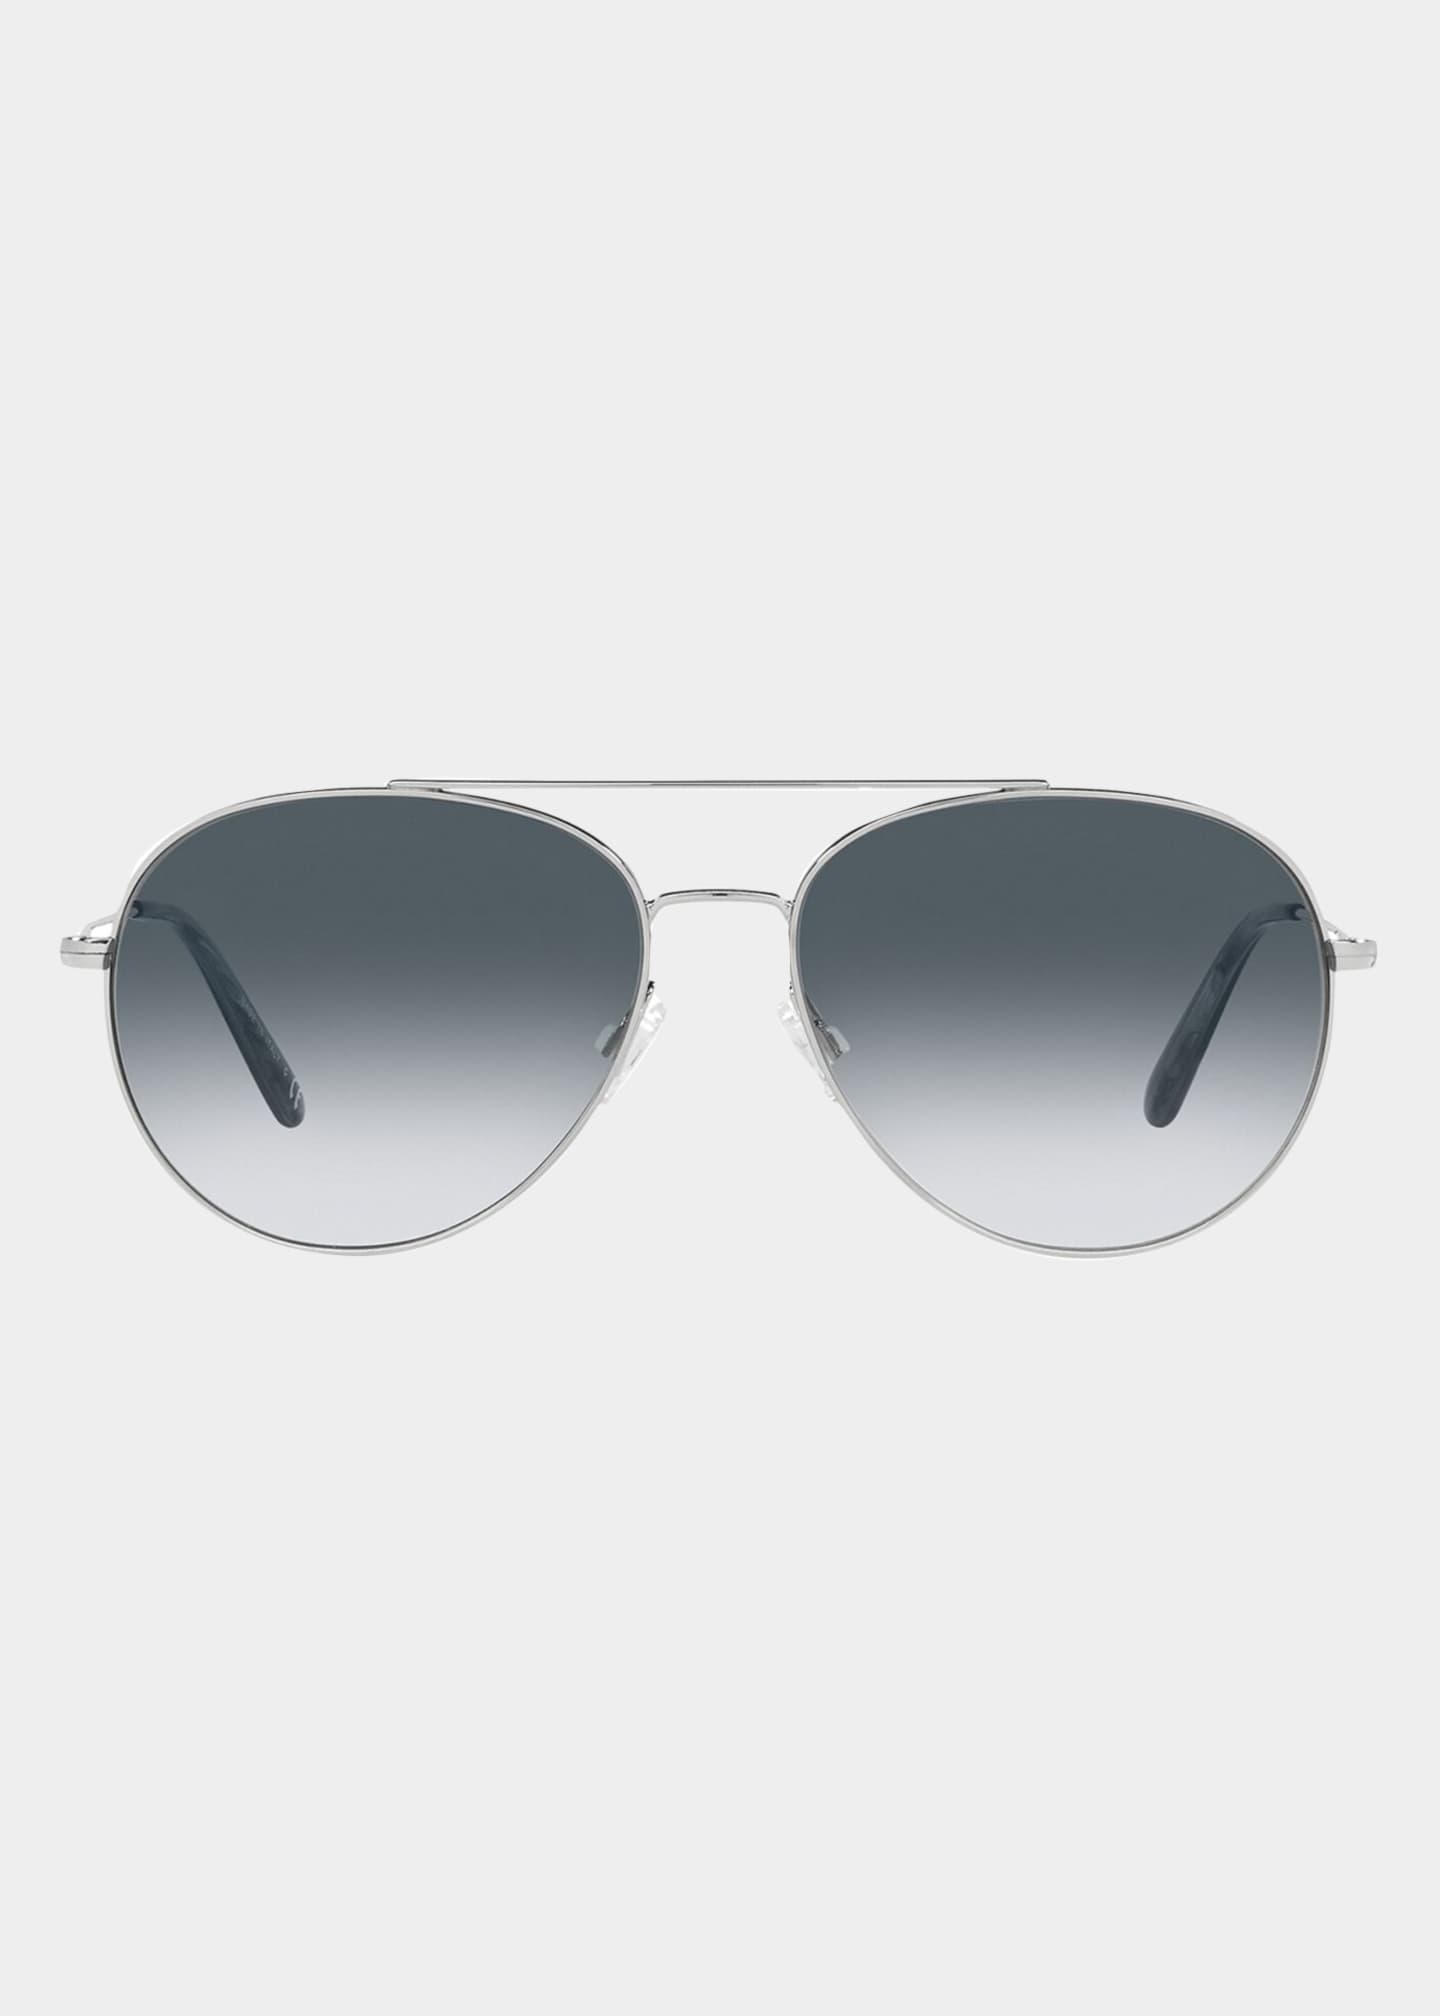 Oliver Peoples Airdale Metal Aviator Sunglasses, Silver - Bergdorf Goodman